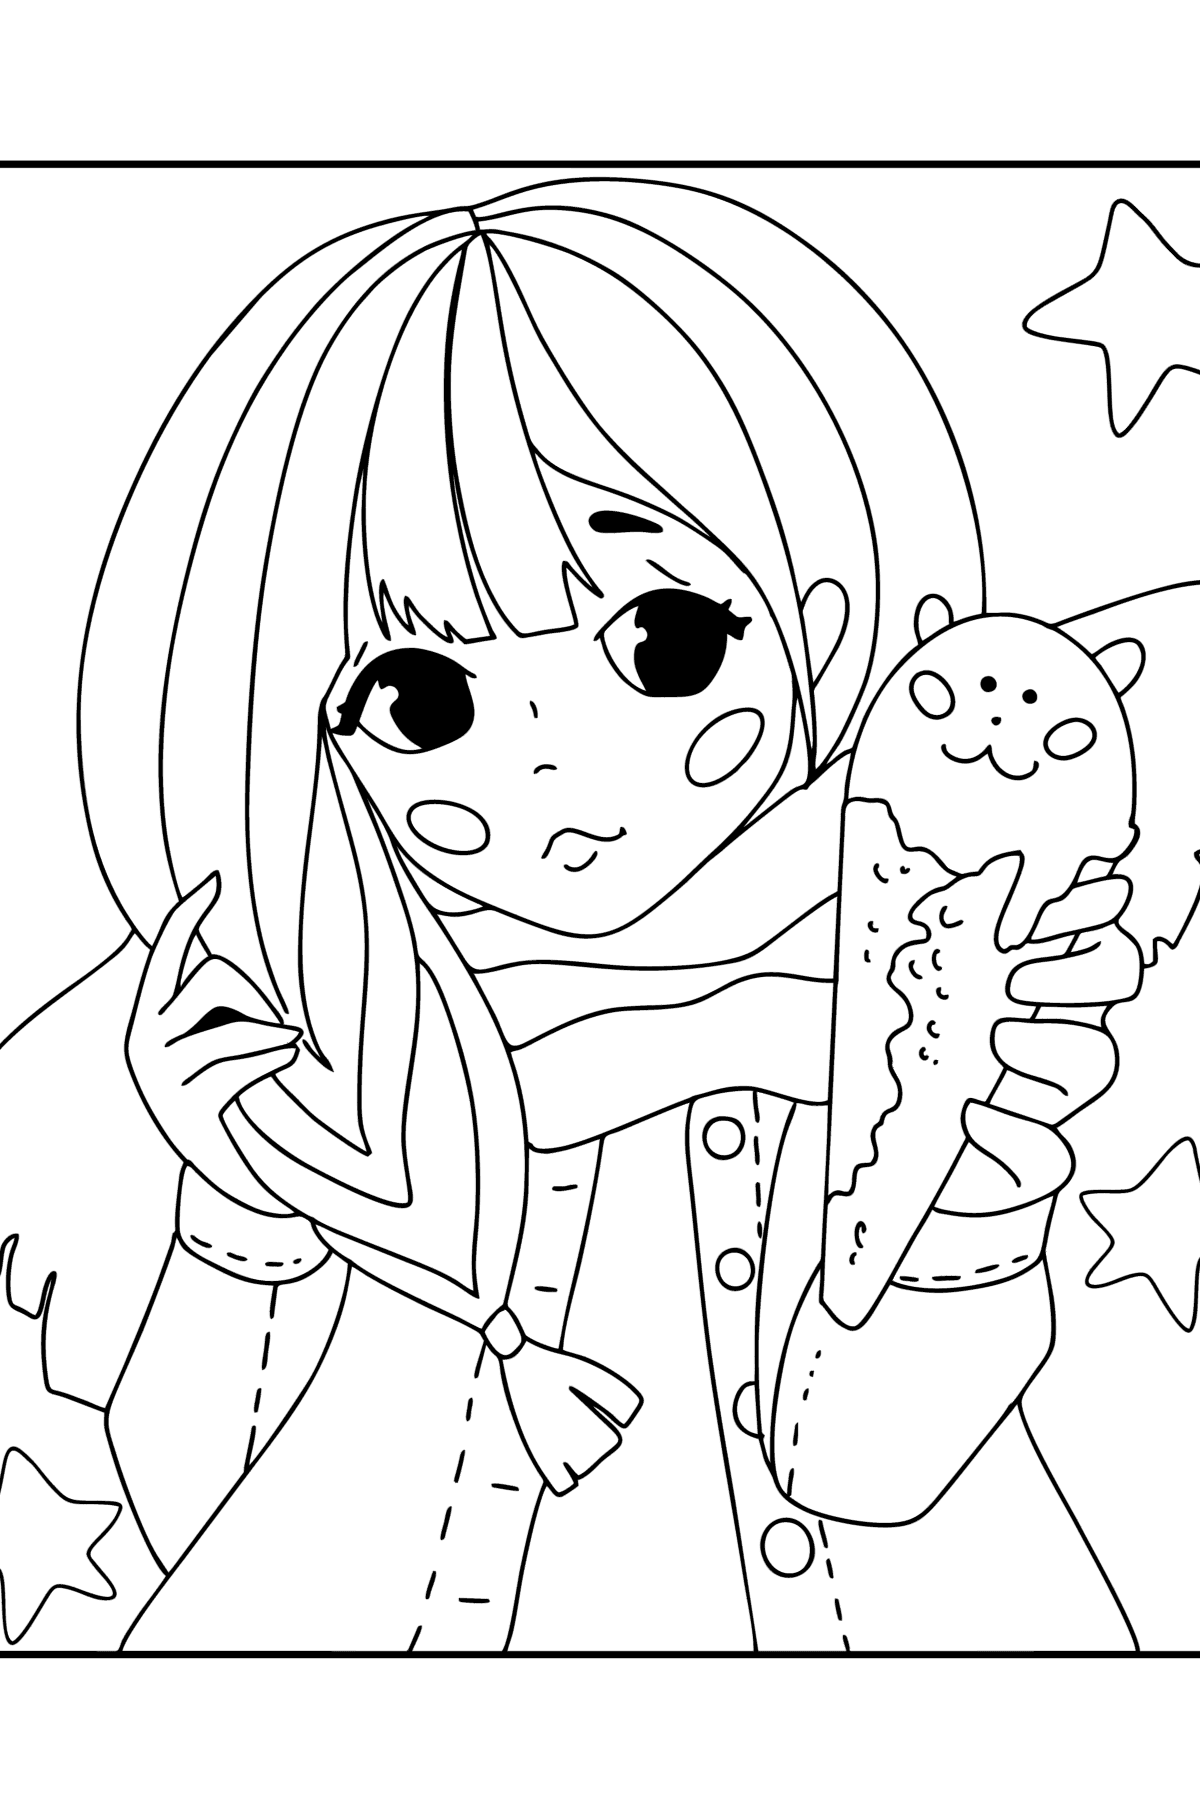 Pretty anime girl coloring page - Coloring Pages for Kids